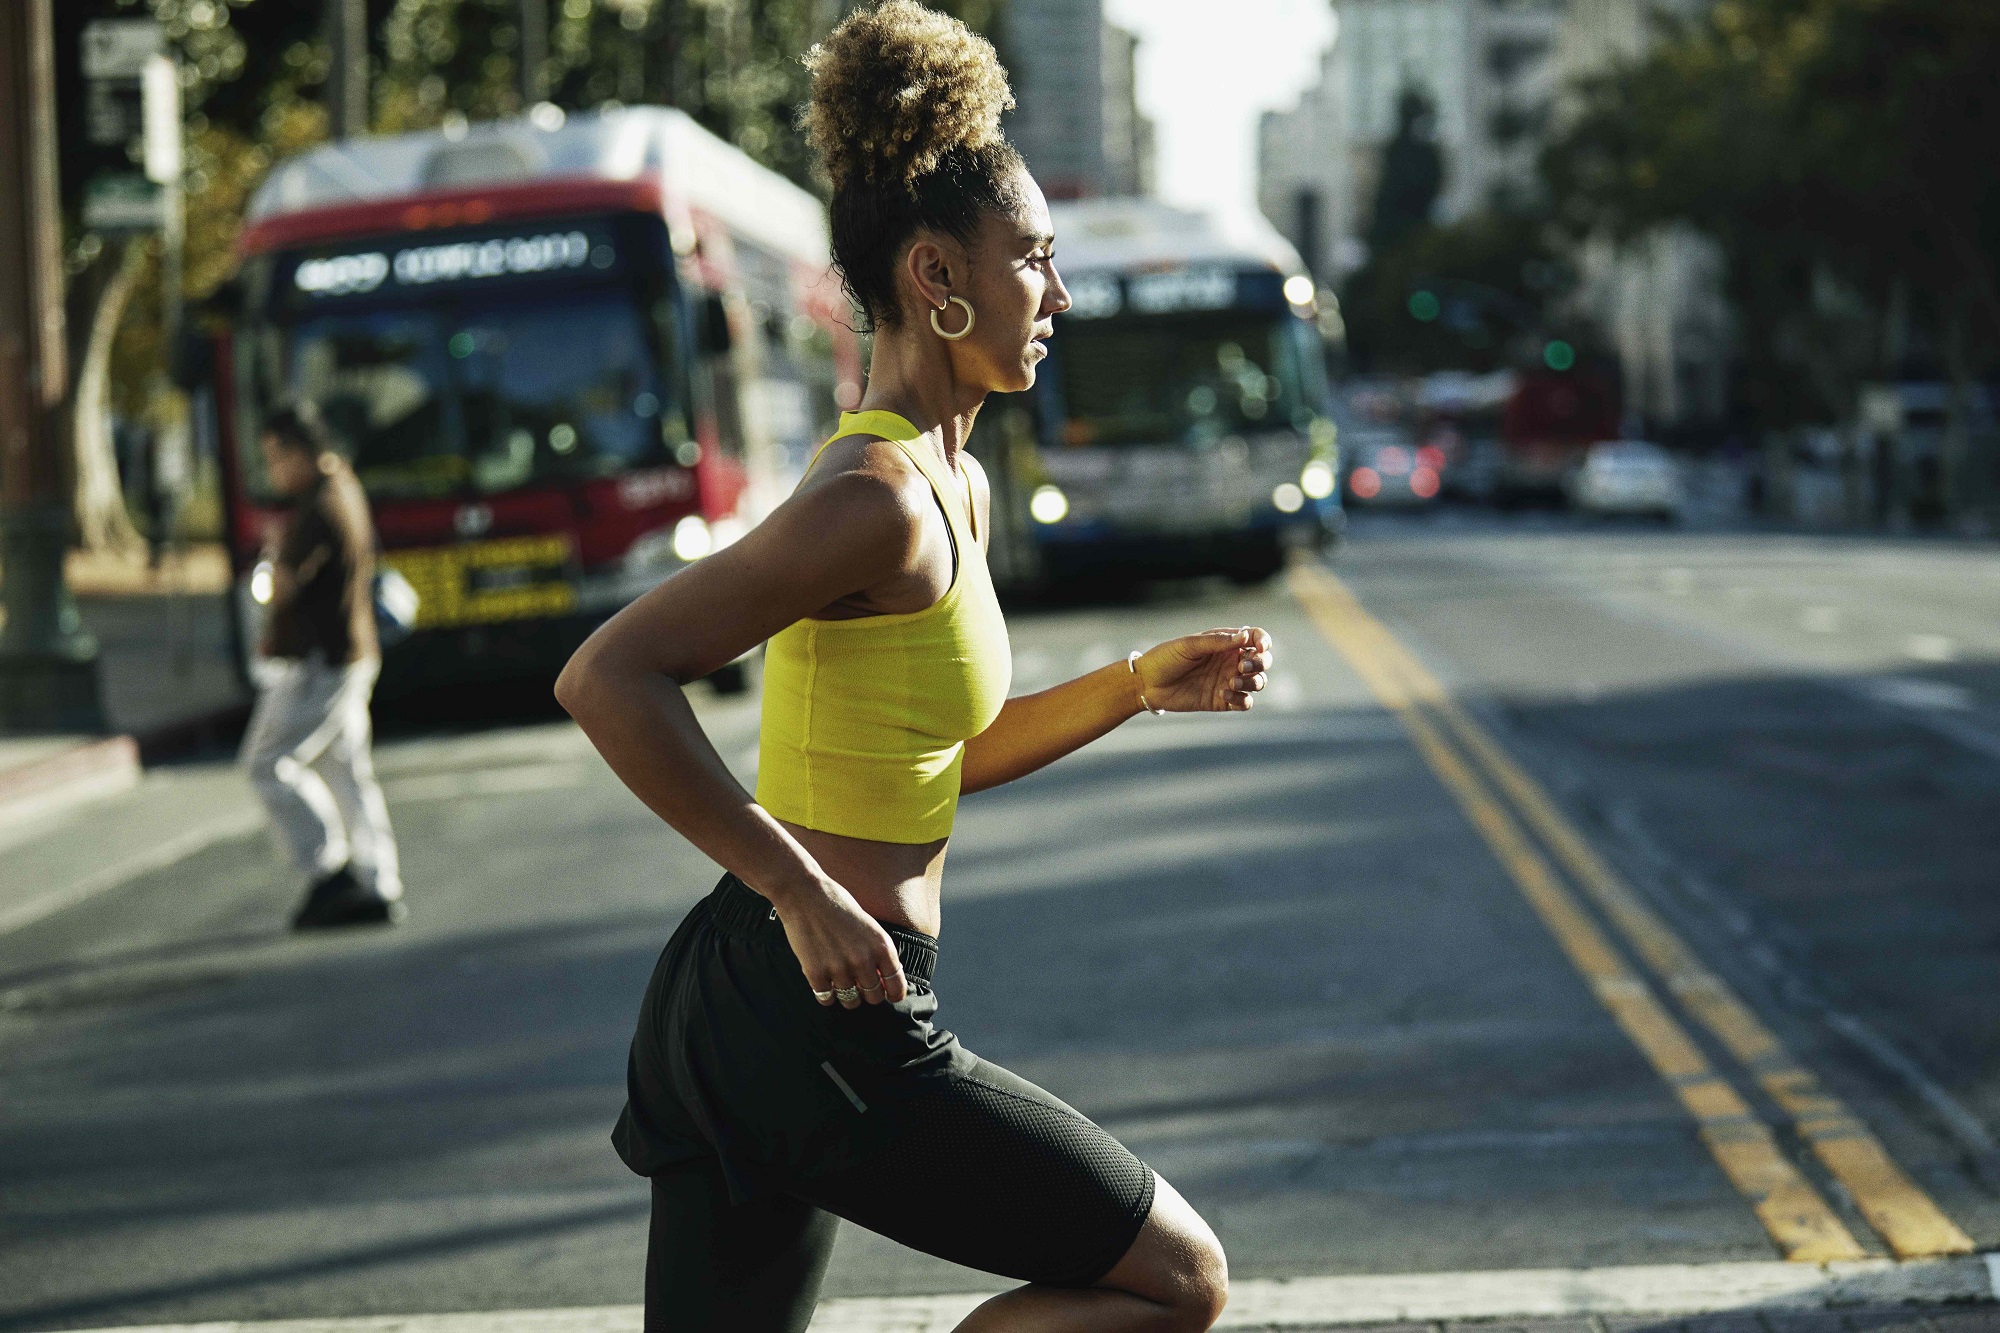 kruising kom paddestoel Adidas Launches "Run to Reconnect" to Celebrate Running As a Mental Health  Tool - adsofbrands.net